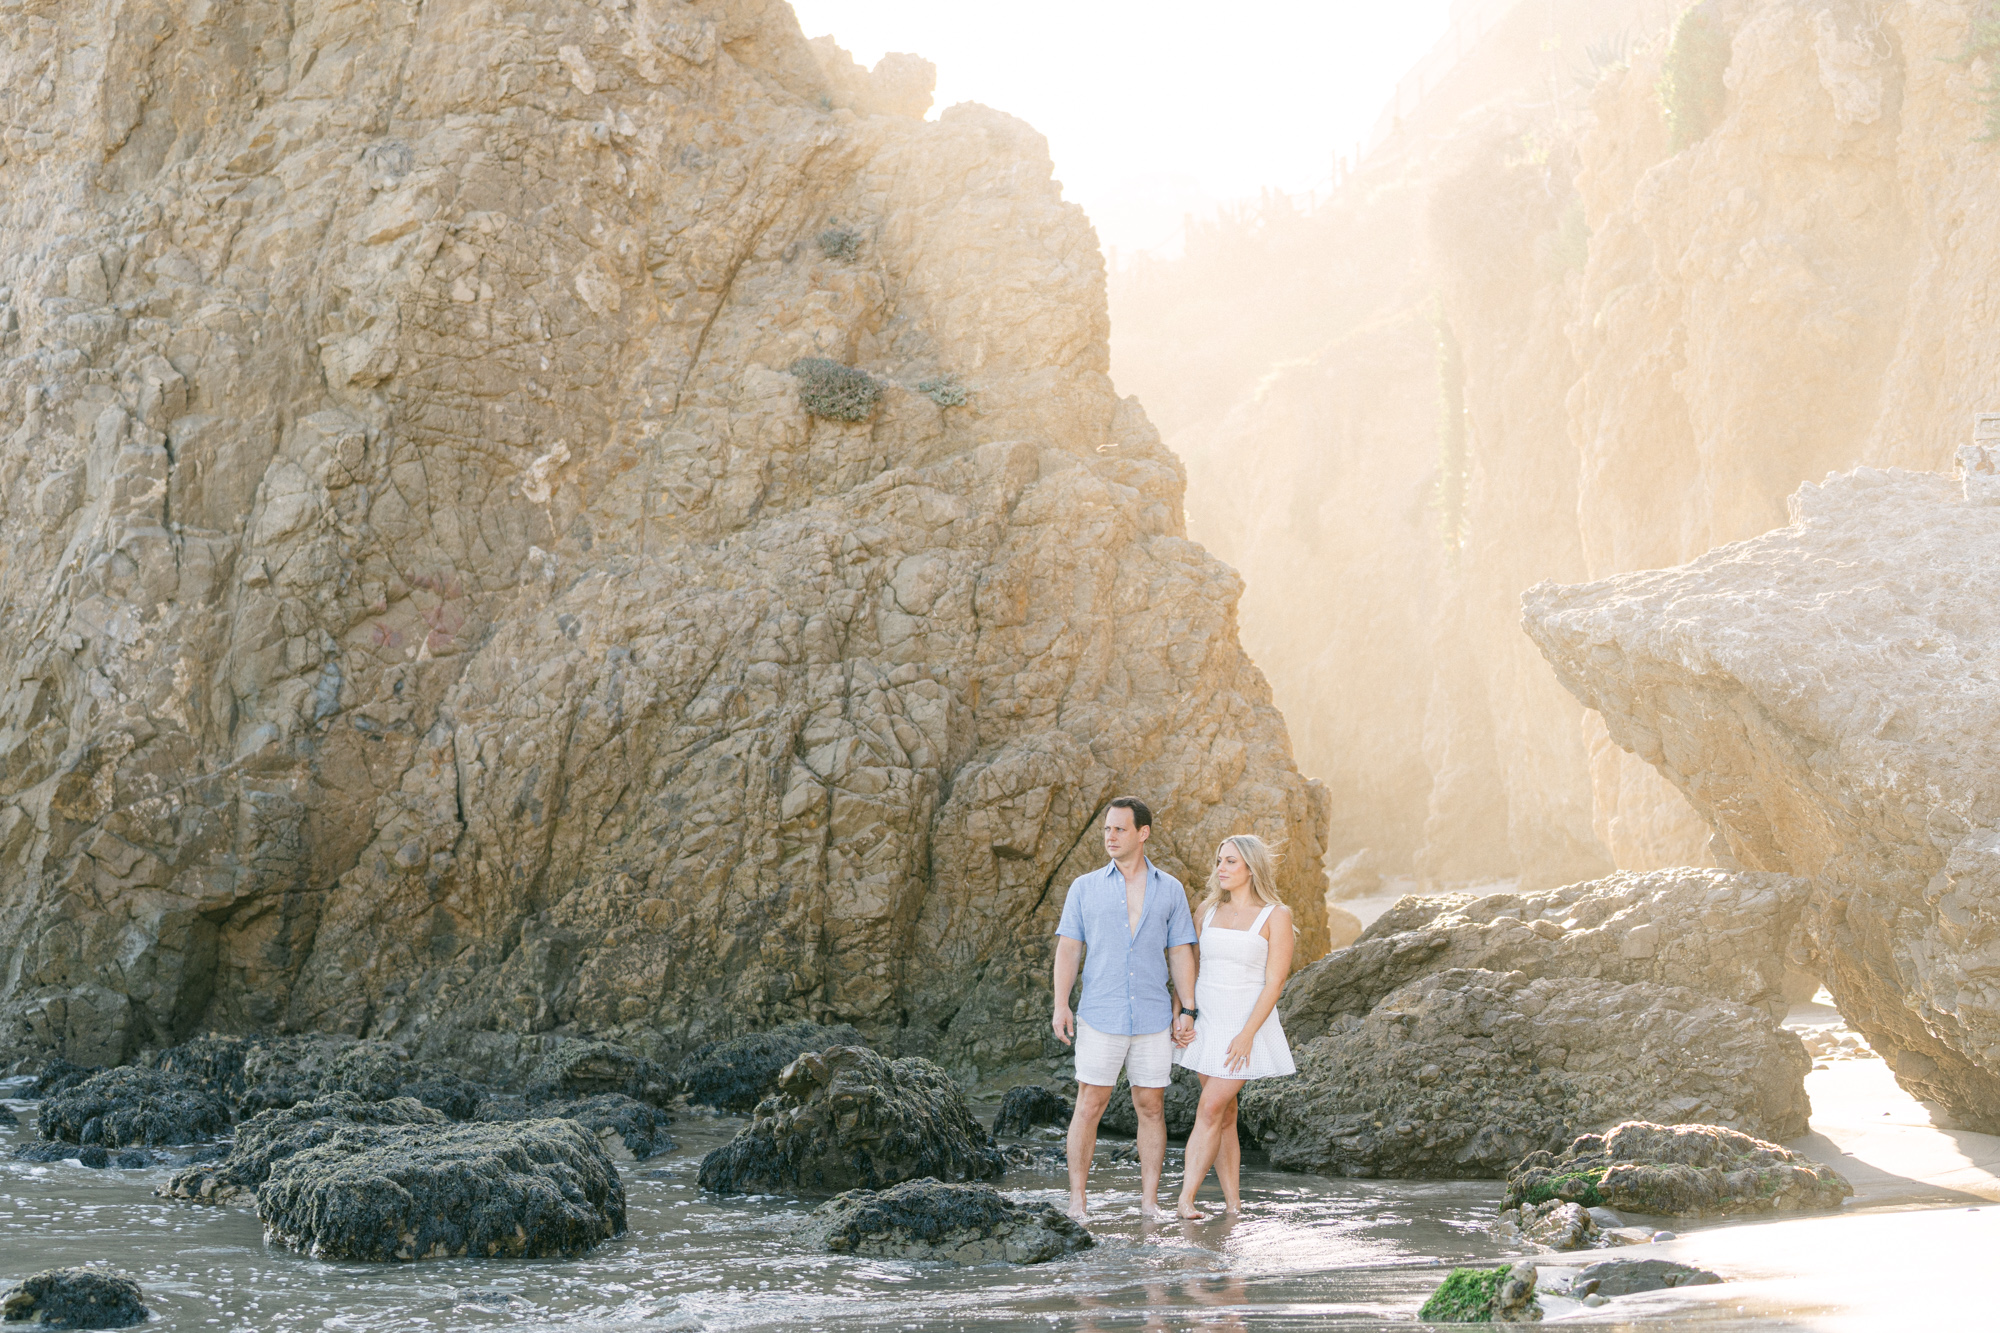 couple standing on the sand in front of the rocks with the light pouring in at el matador beach in malibu ca during golden hour girl is wearing a short white dress and man is wearing a light blue shirt and white shorts taken my magnolia west photography best wedding photographer in malibu